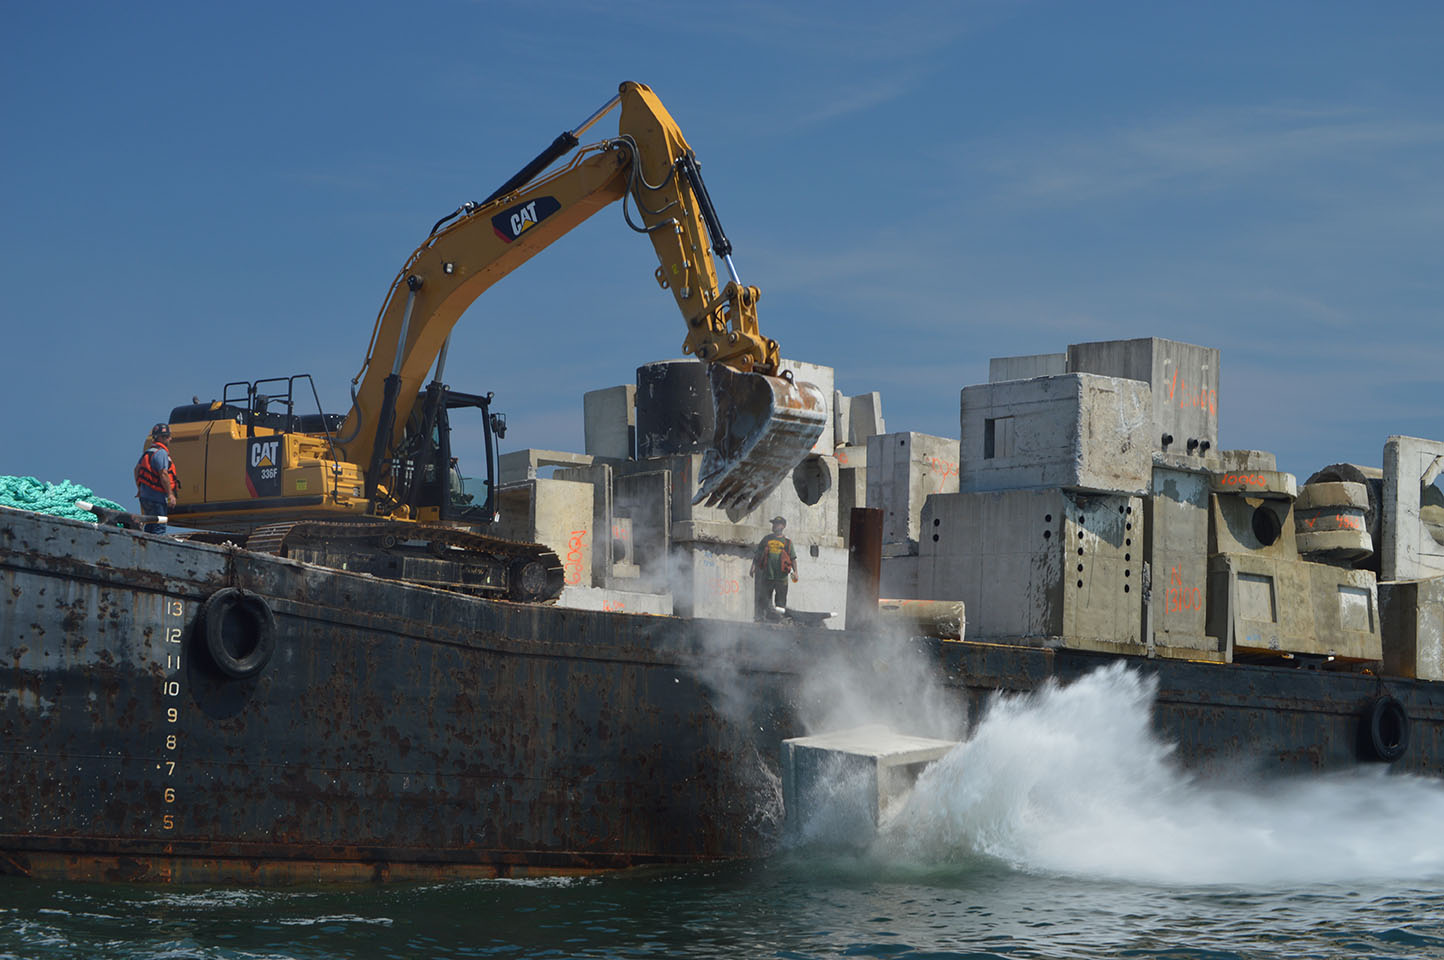 Structure is deployed into the ocean as part of the Manasquan Inlet Reef. (Photo: Daniel Nee)